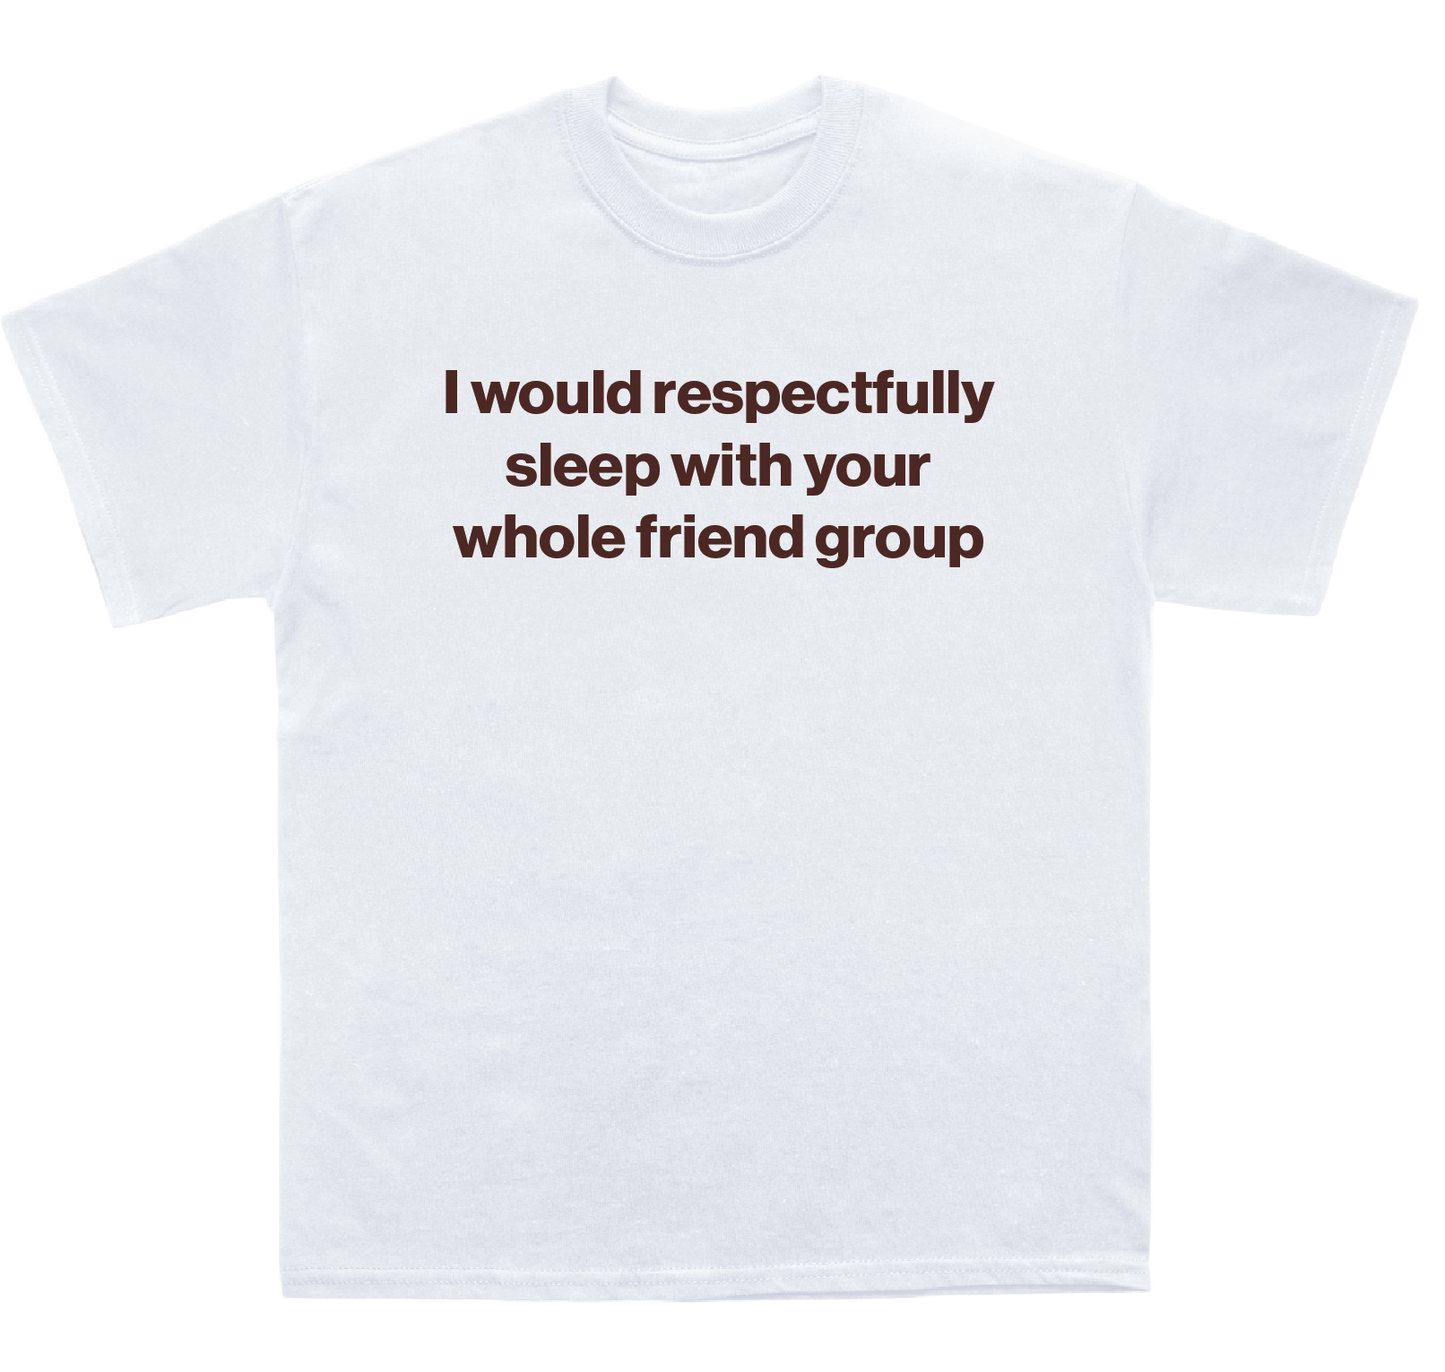 I would respectfully sleep with your whole friend group shirt